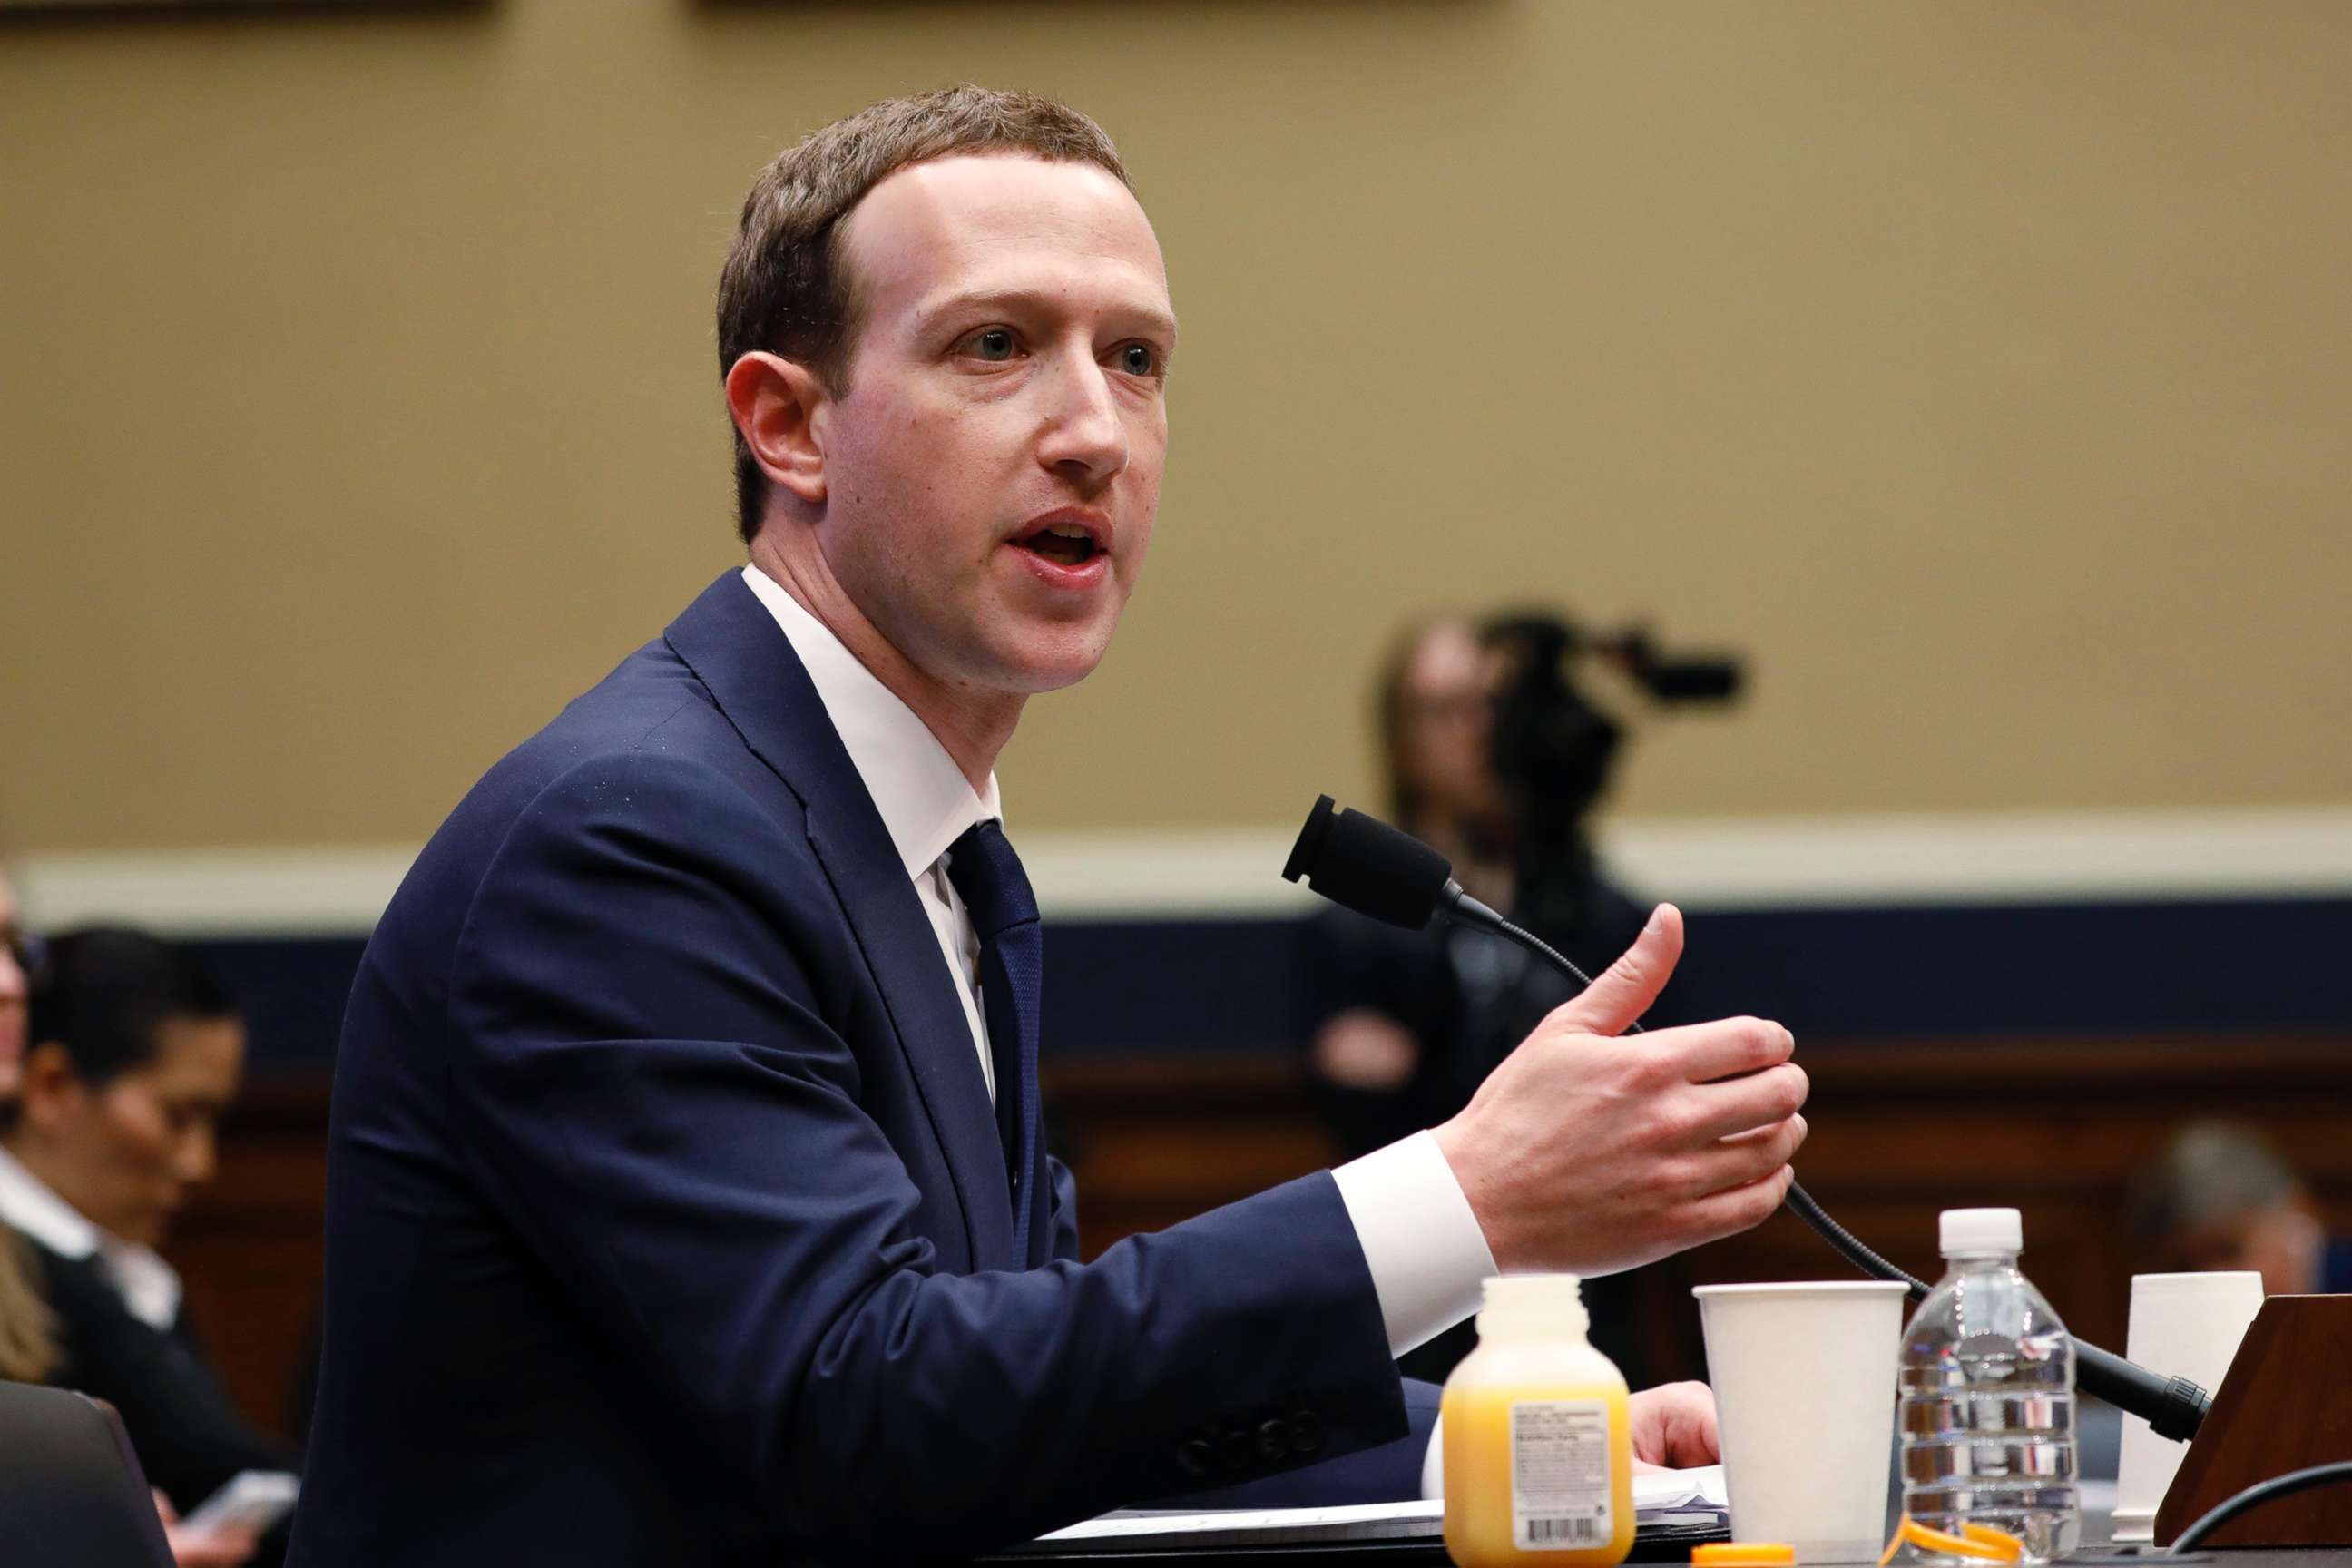 PHOTO: Facebook CEO Mark Zuckerberg testifies before a House Energy and Commerce Committee hearing regarding the company's use and protection of user data on Capitol Hill in Washington, D.C., April 11, 2018.